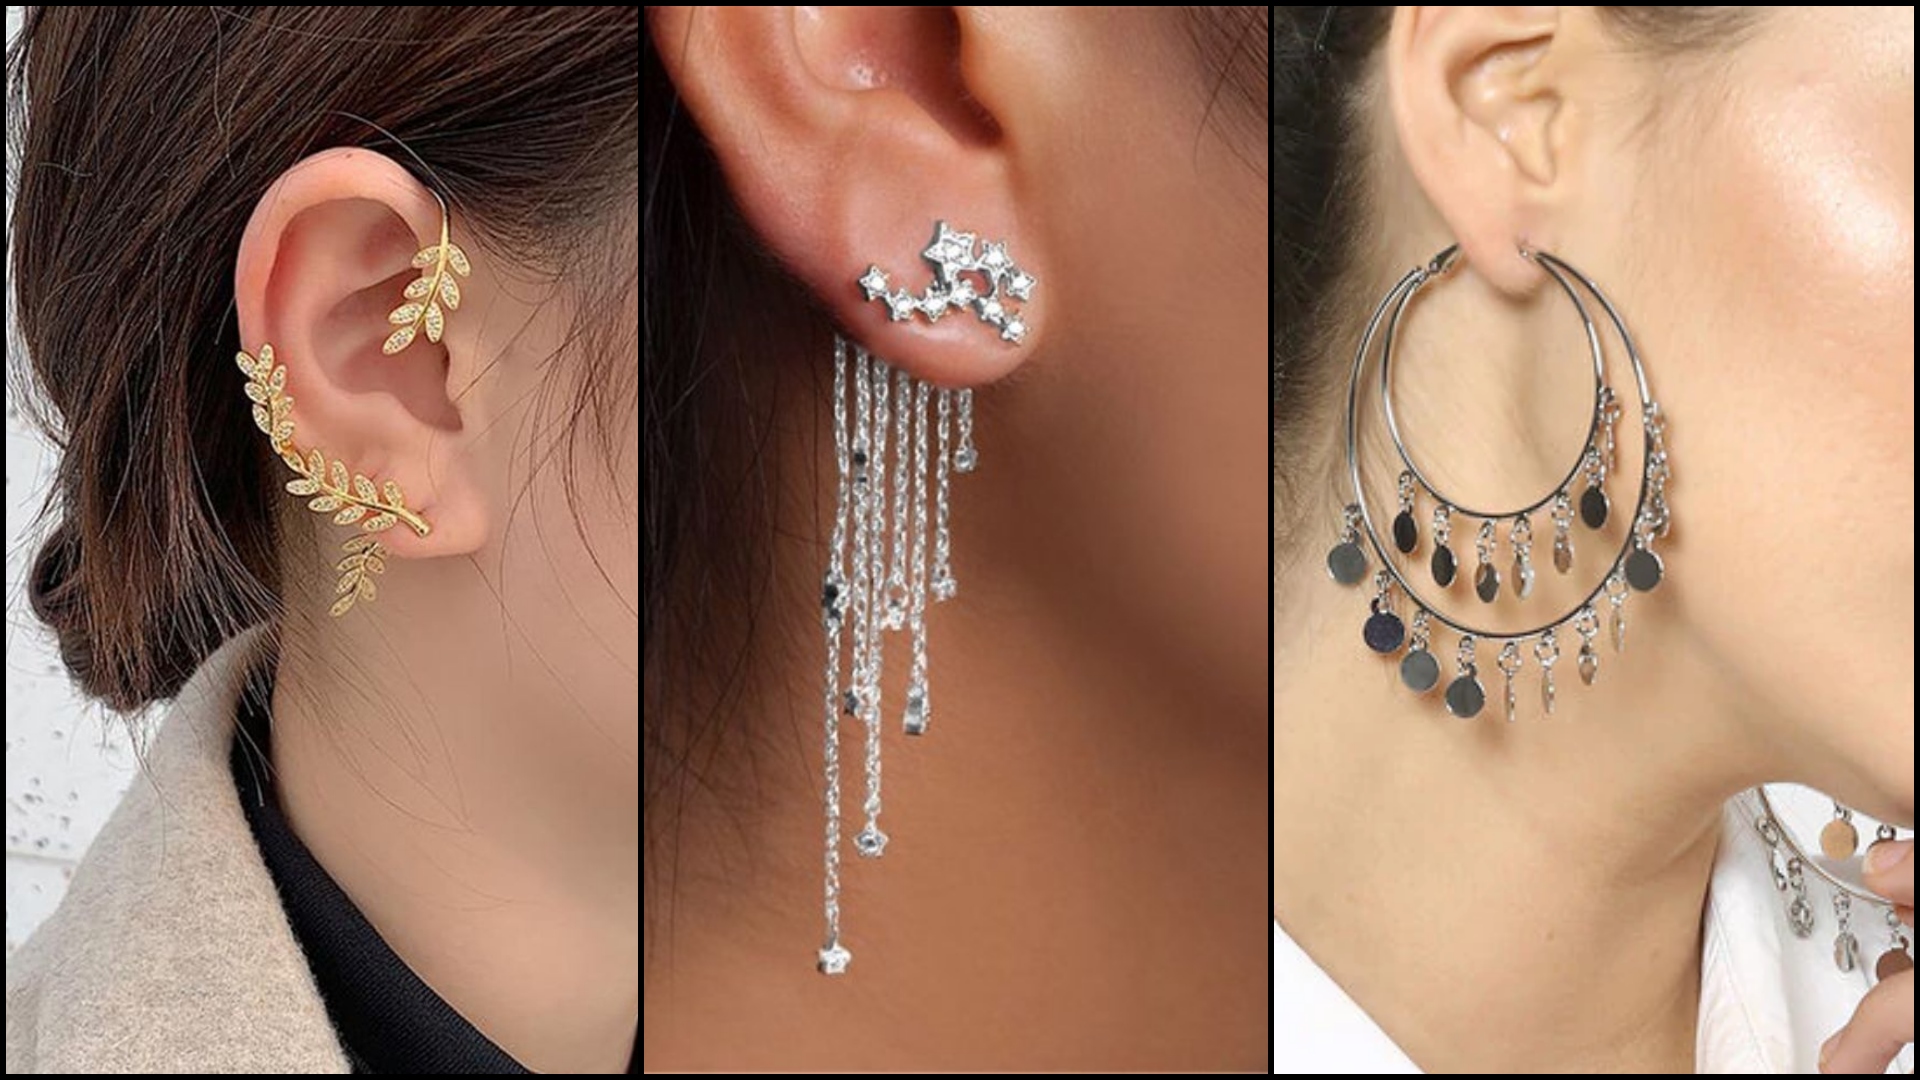 Earring Designs That Will Look Flawless All The Time